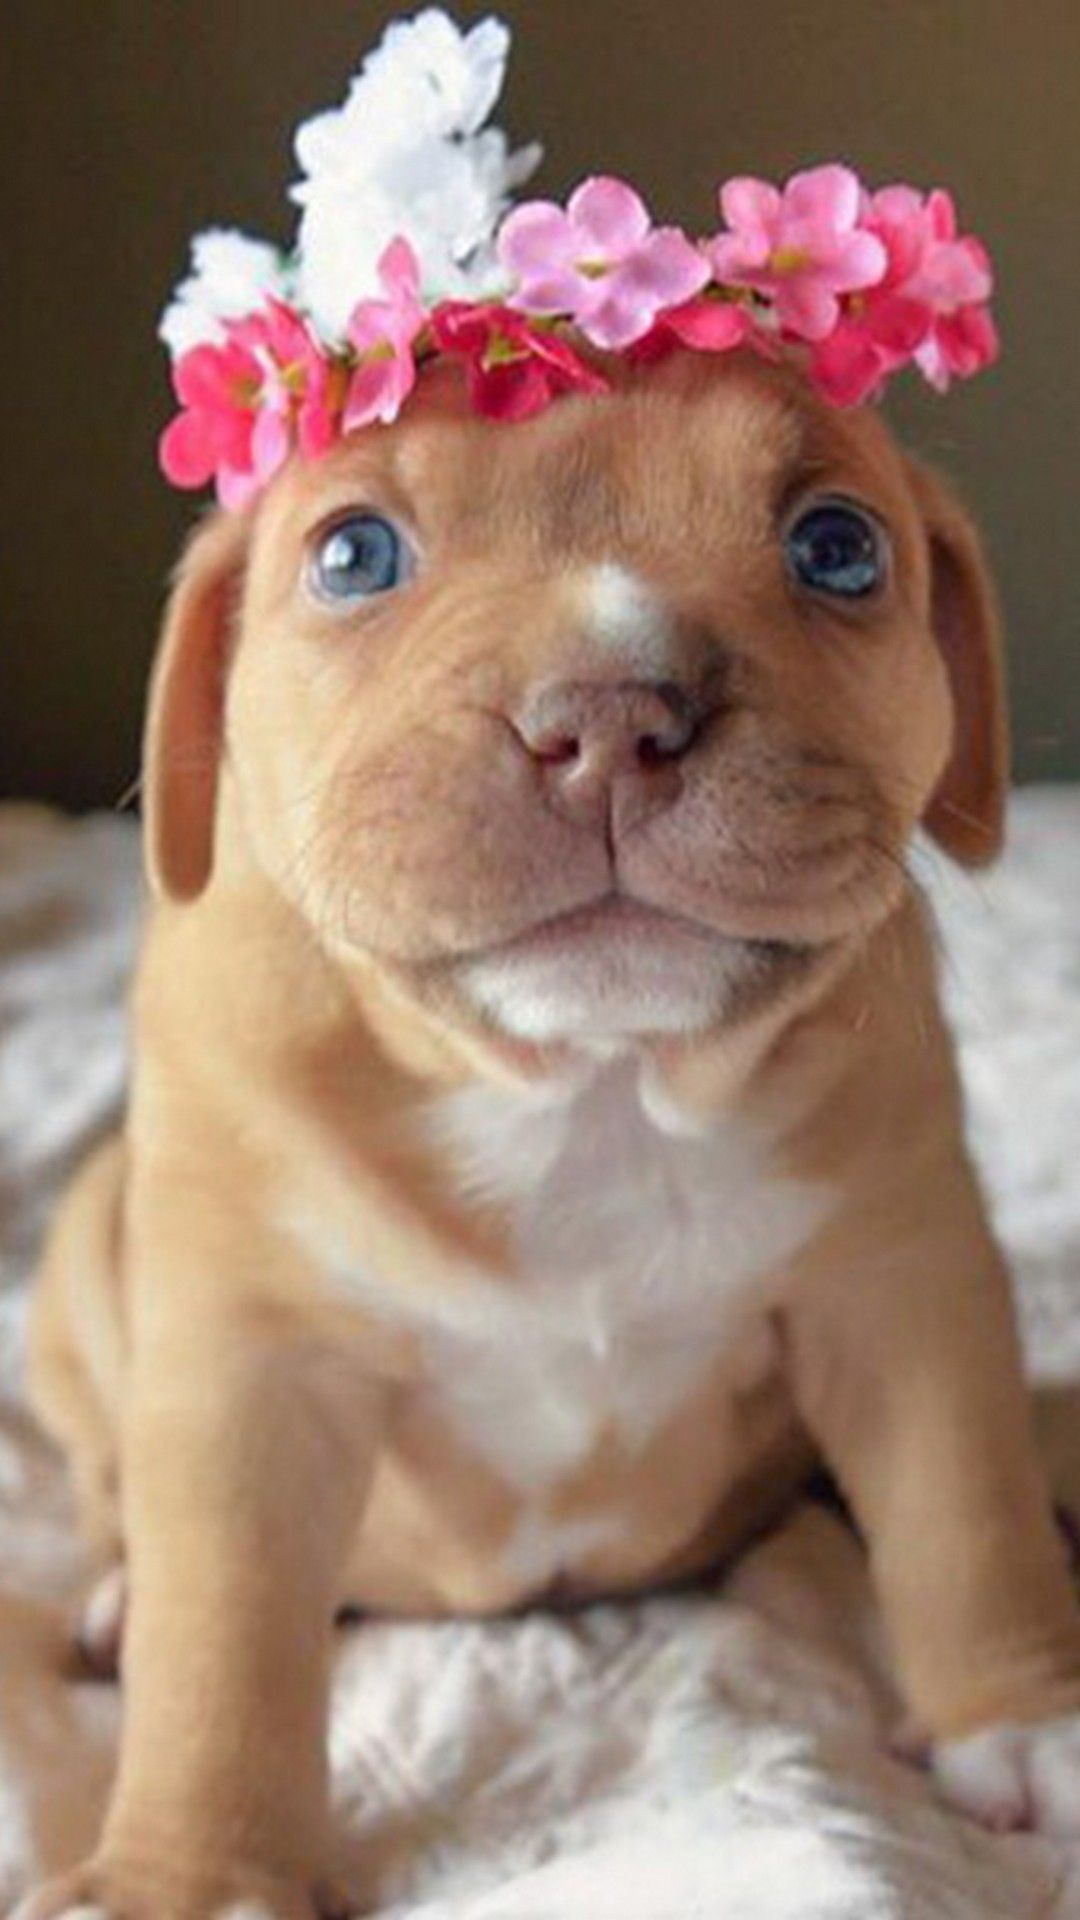 1080x1920 iPhone X Wallpaper Funny Puppies Best iPhone Wallpaper | Pitbulls, Puppy pictures, Puppy day